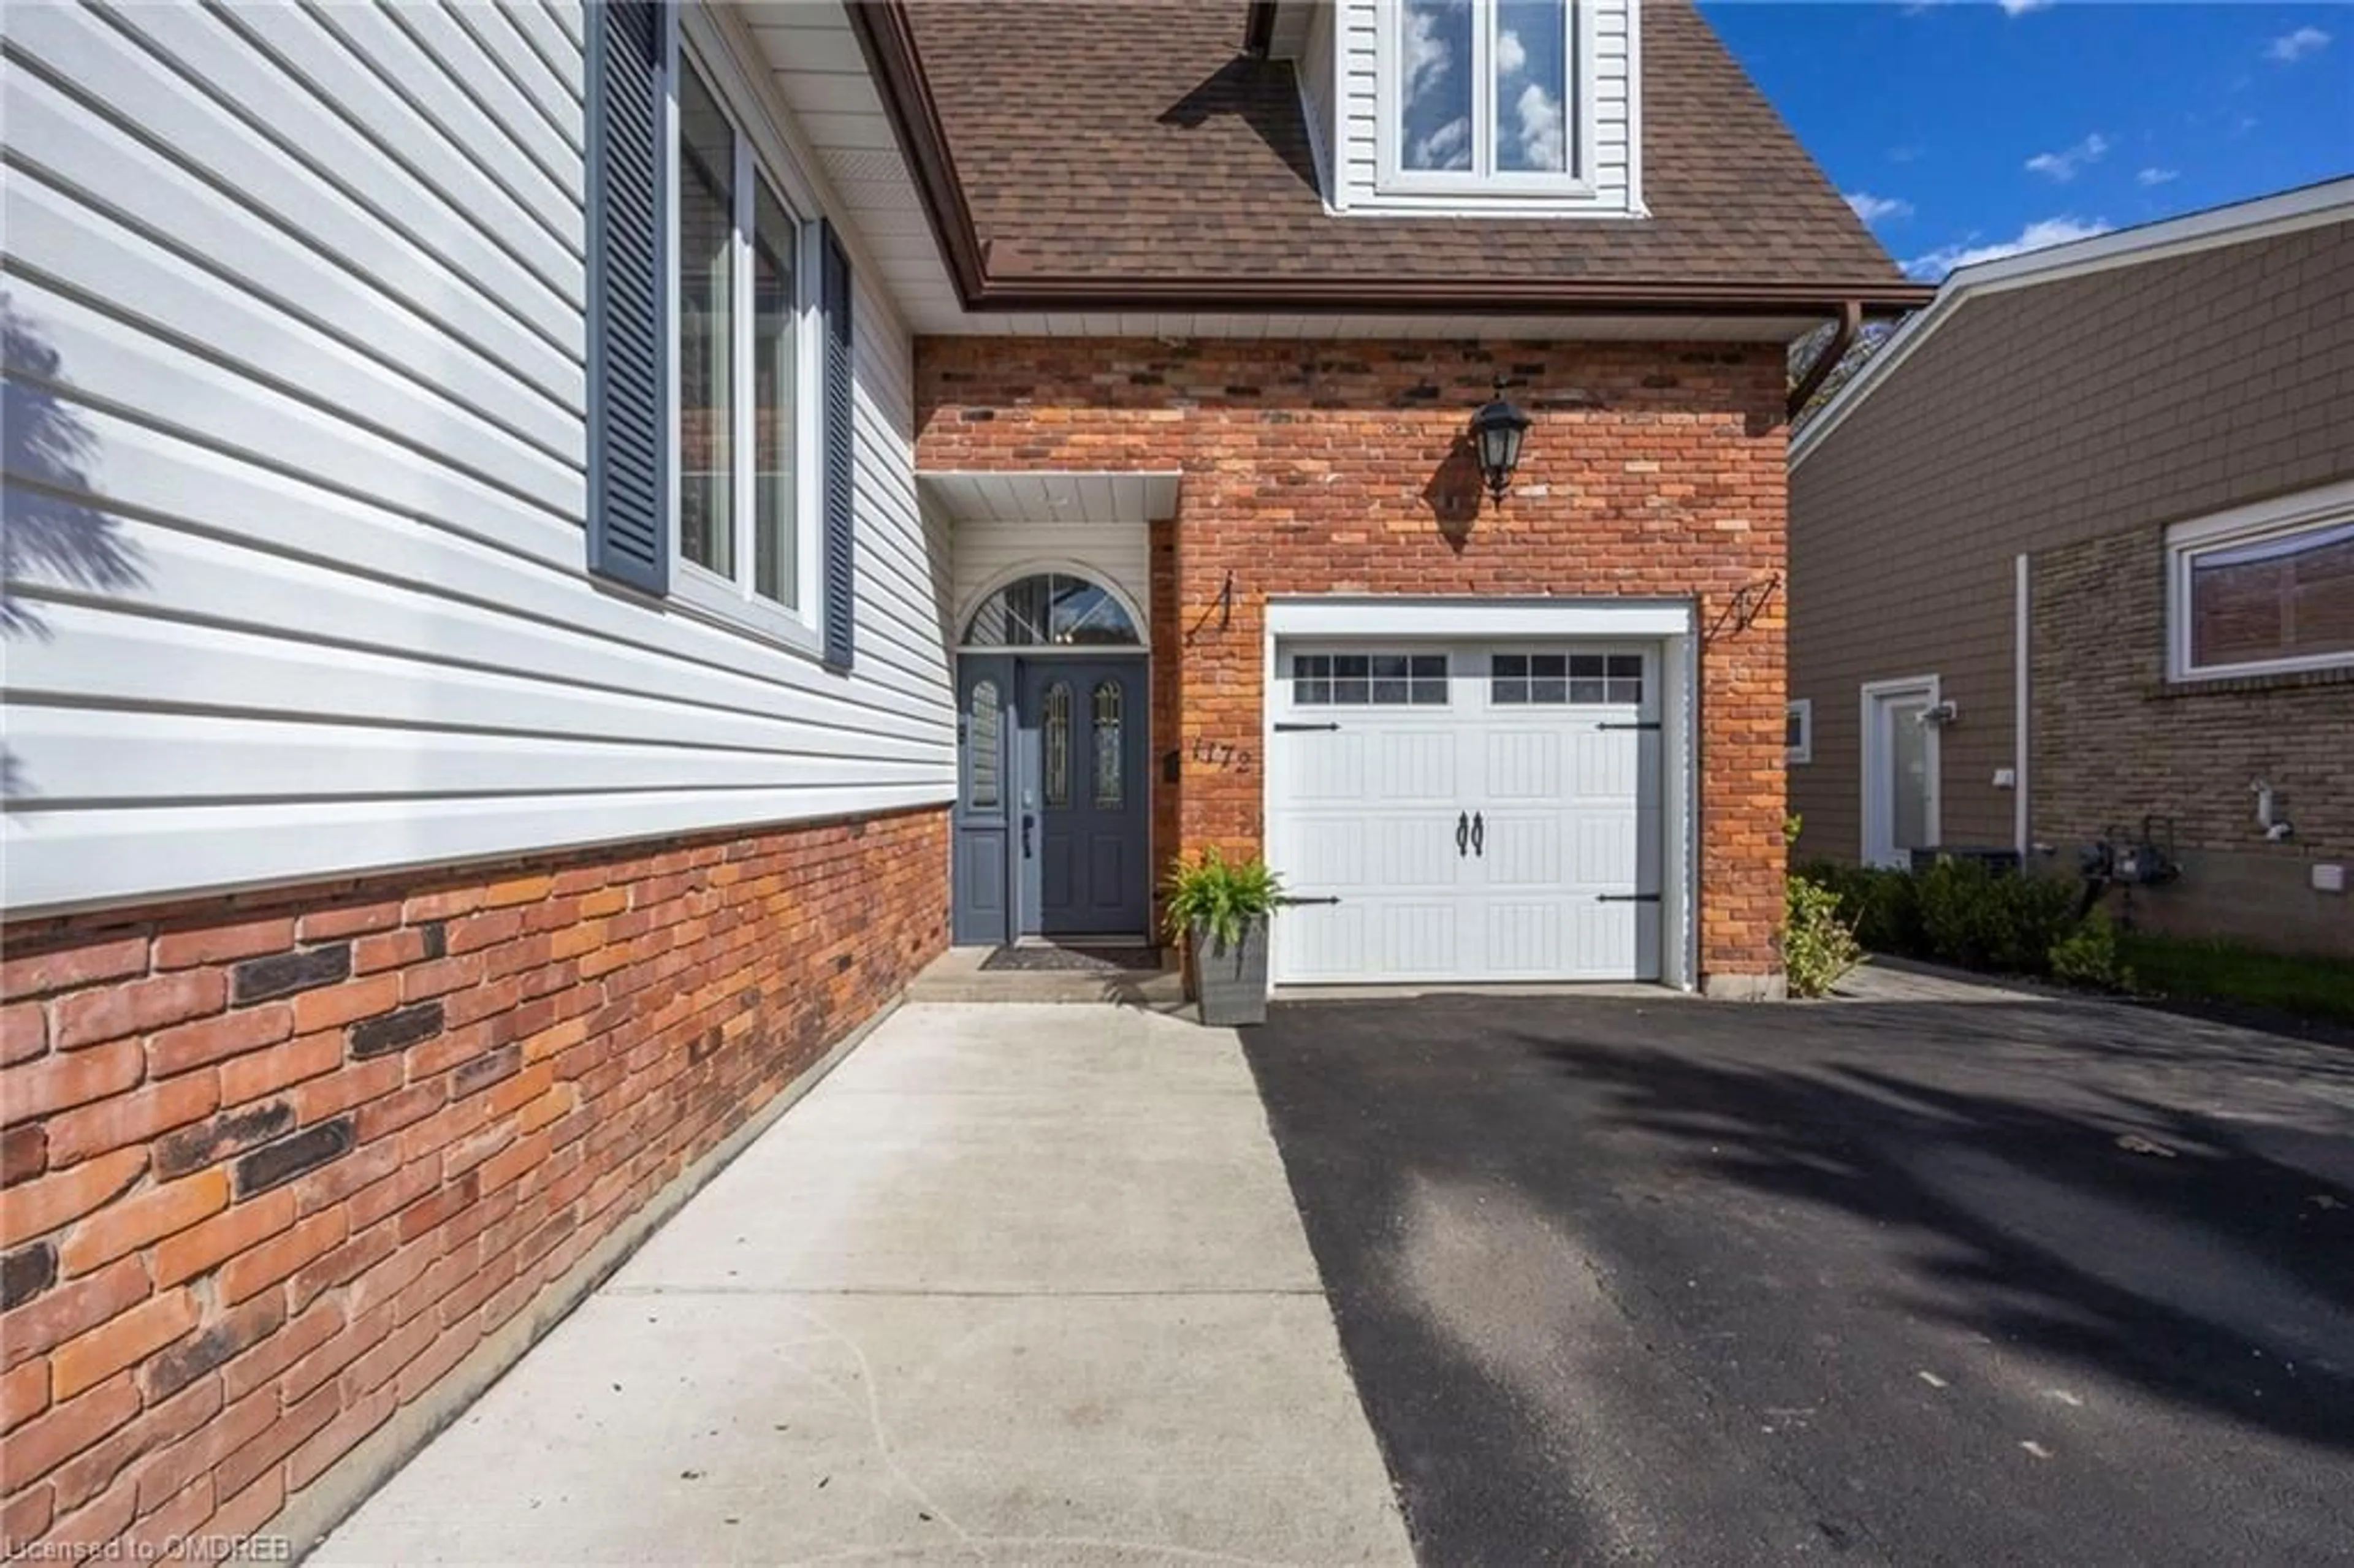 Home with brick exterior material for 1172 Falgarwood Dr, Oakville Ontario L6H 2L3